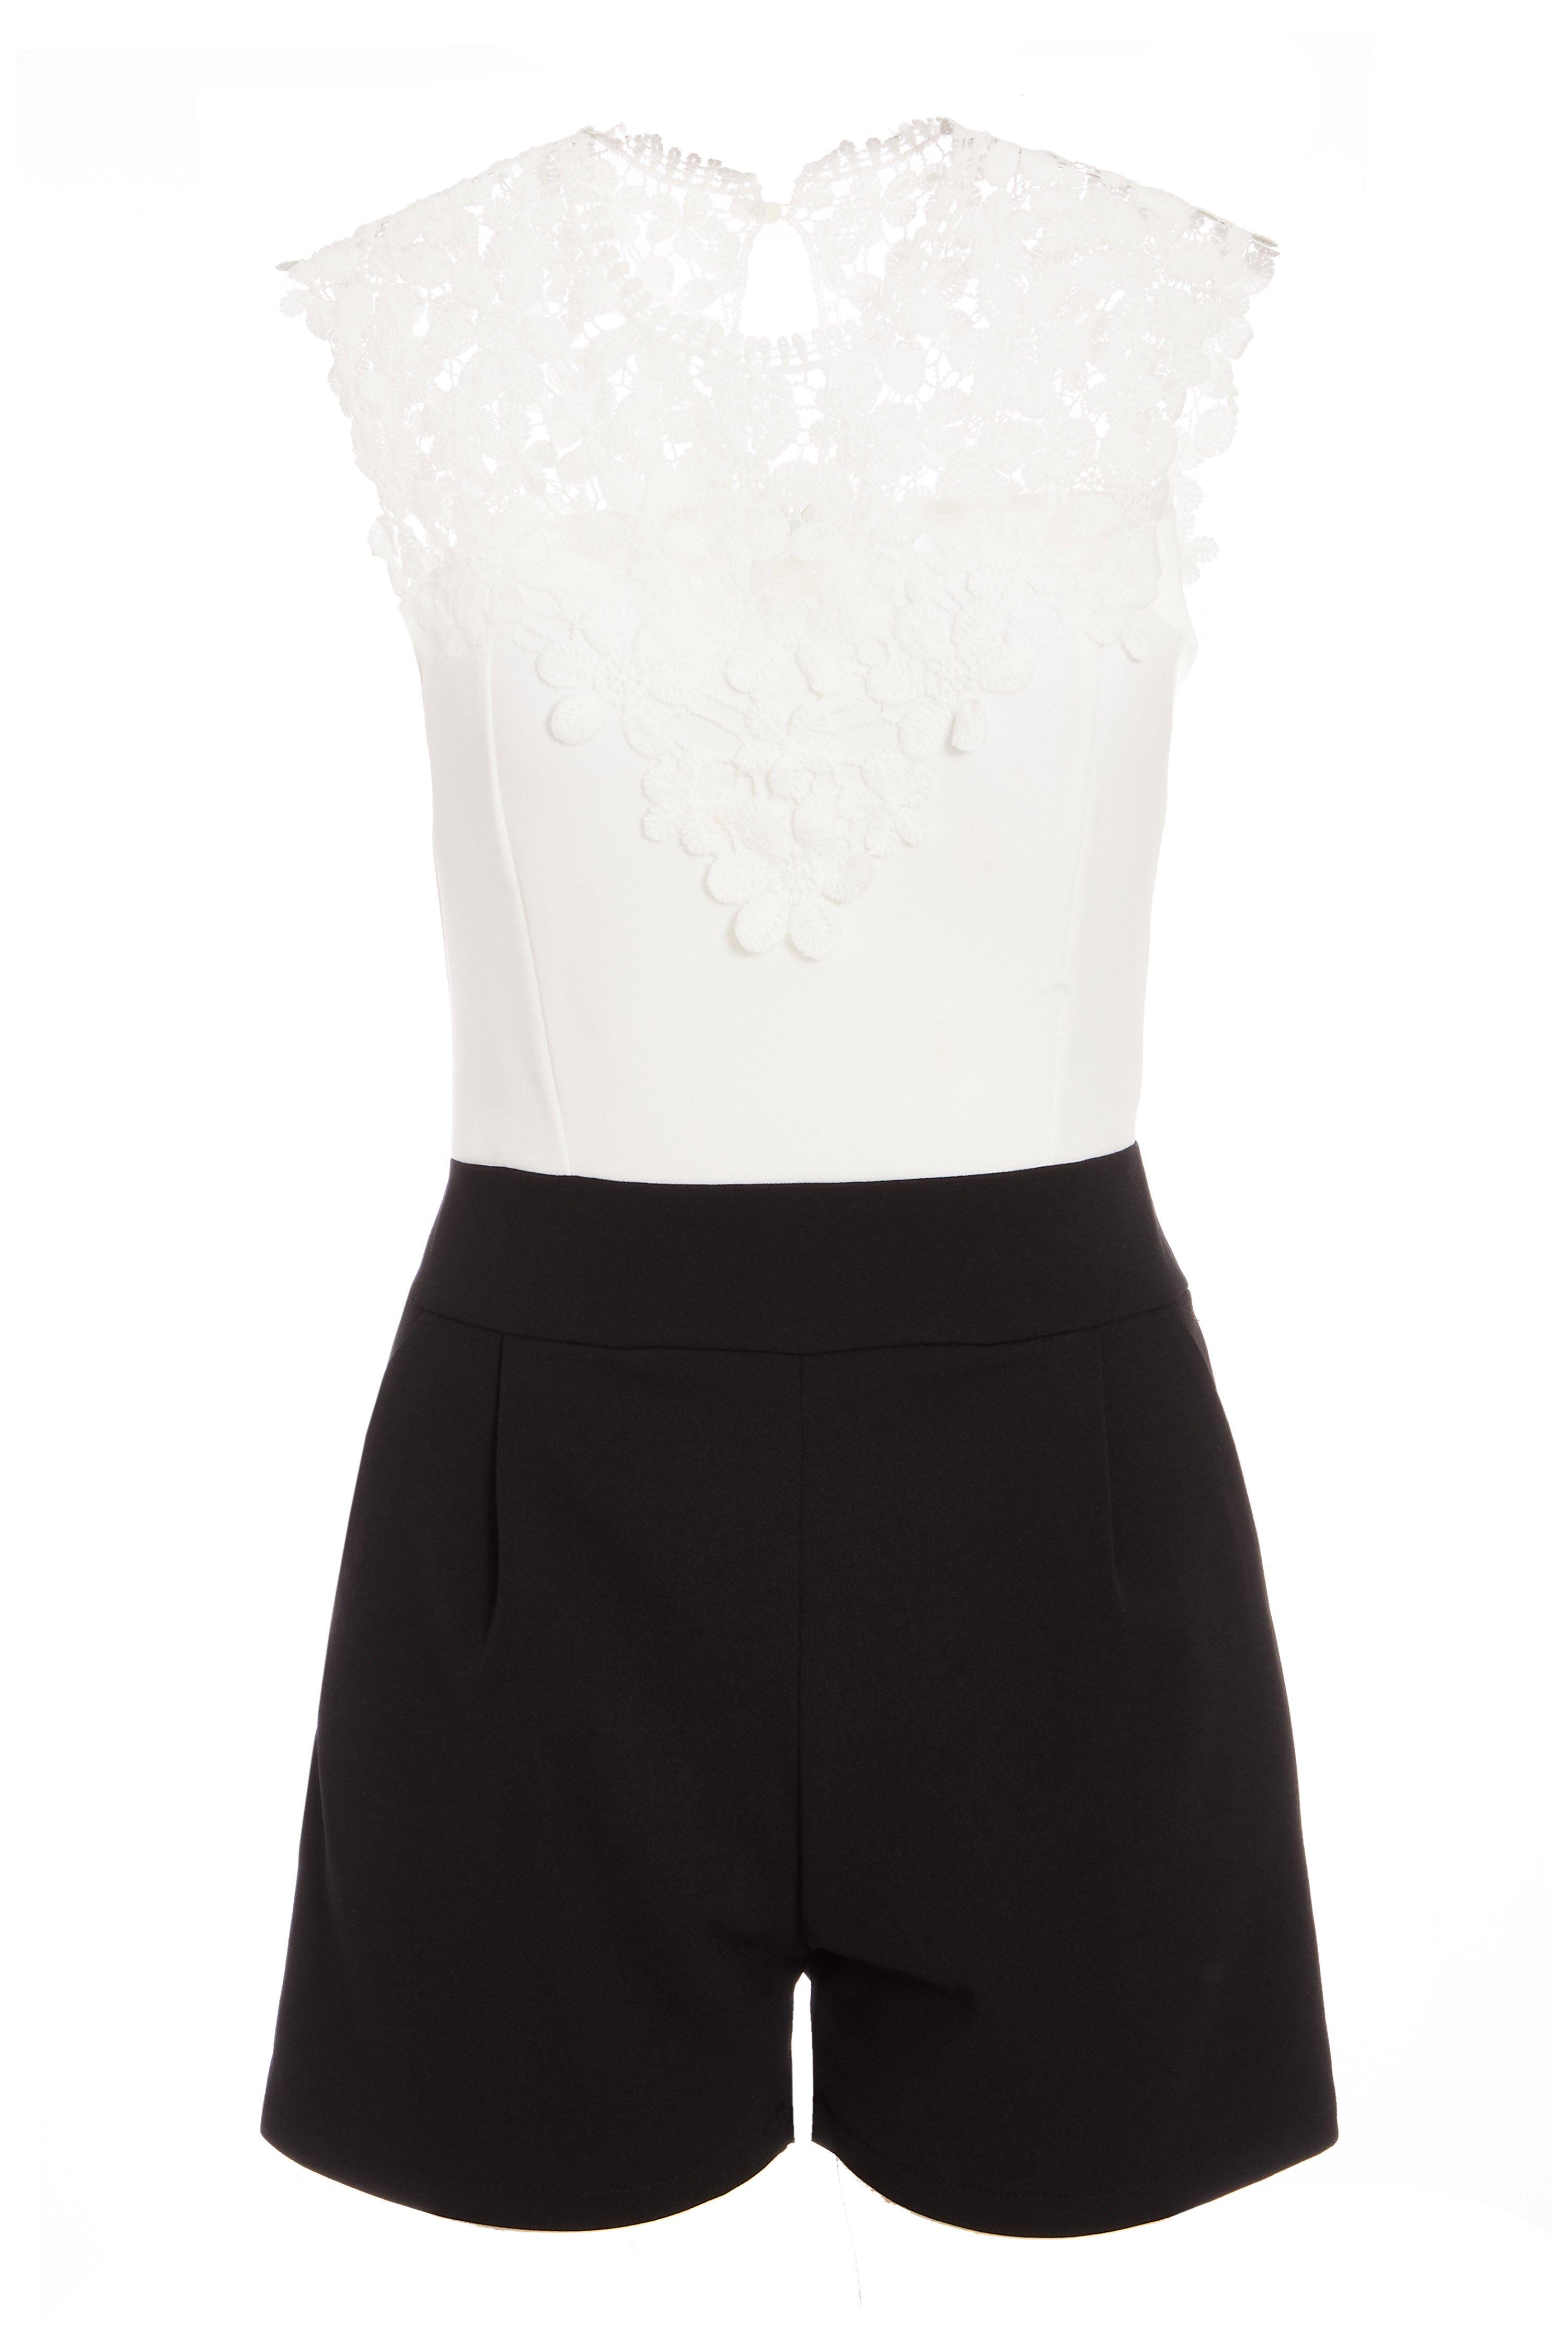 Black And White Lace Playsuit - Quiz Clothing